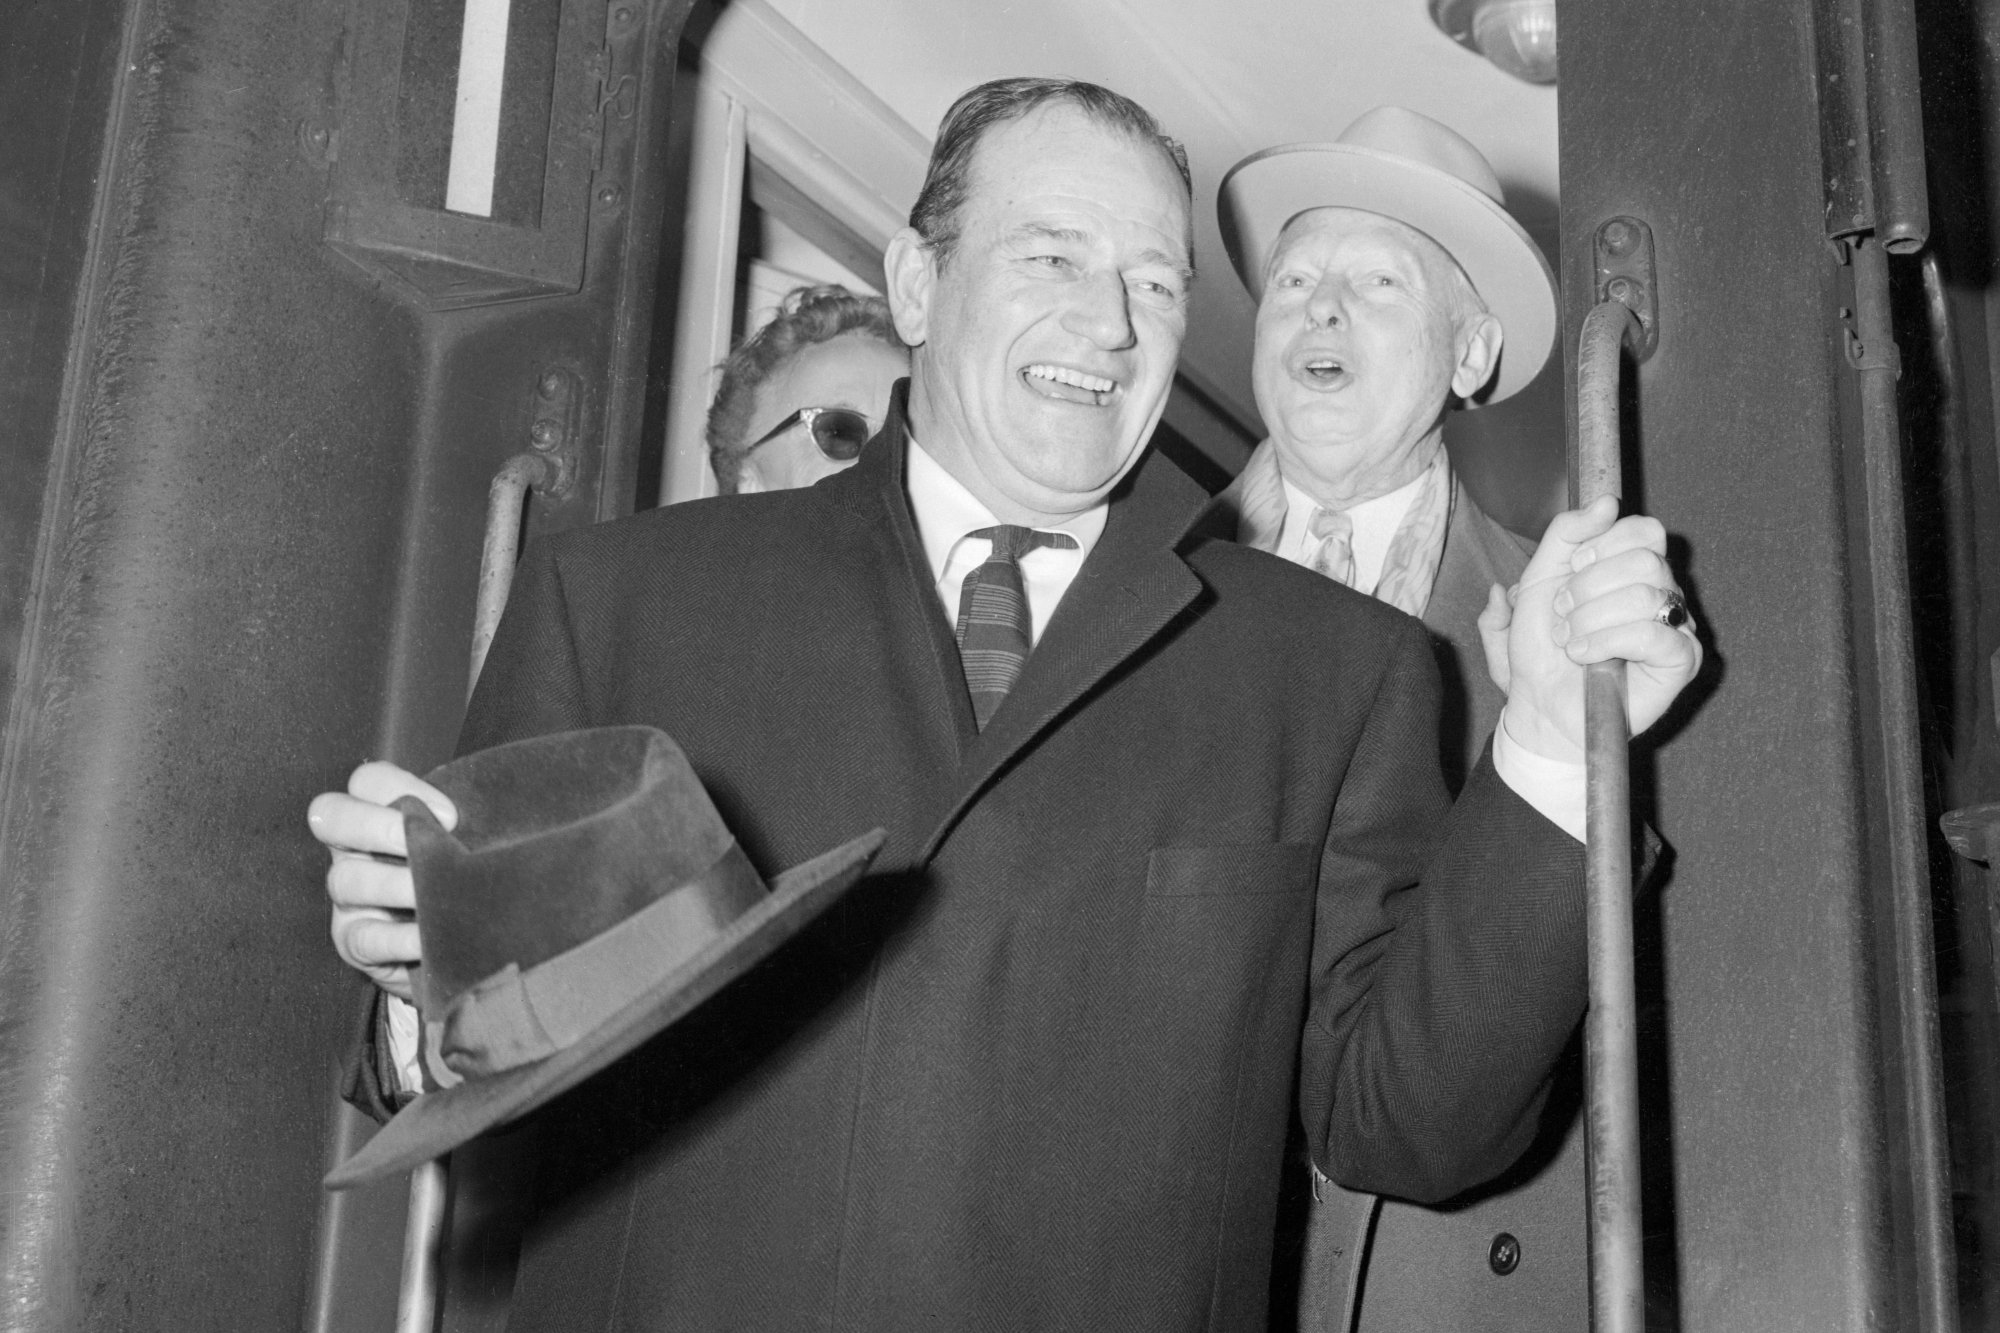 John Wayne, who starred in the movie 'The Conqueror,' smiling holding a hat, while wearing a suit